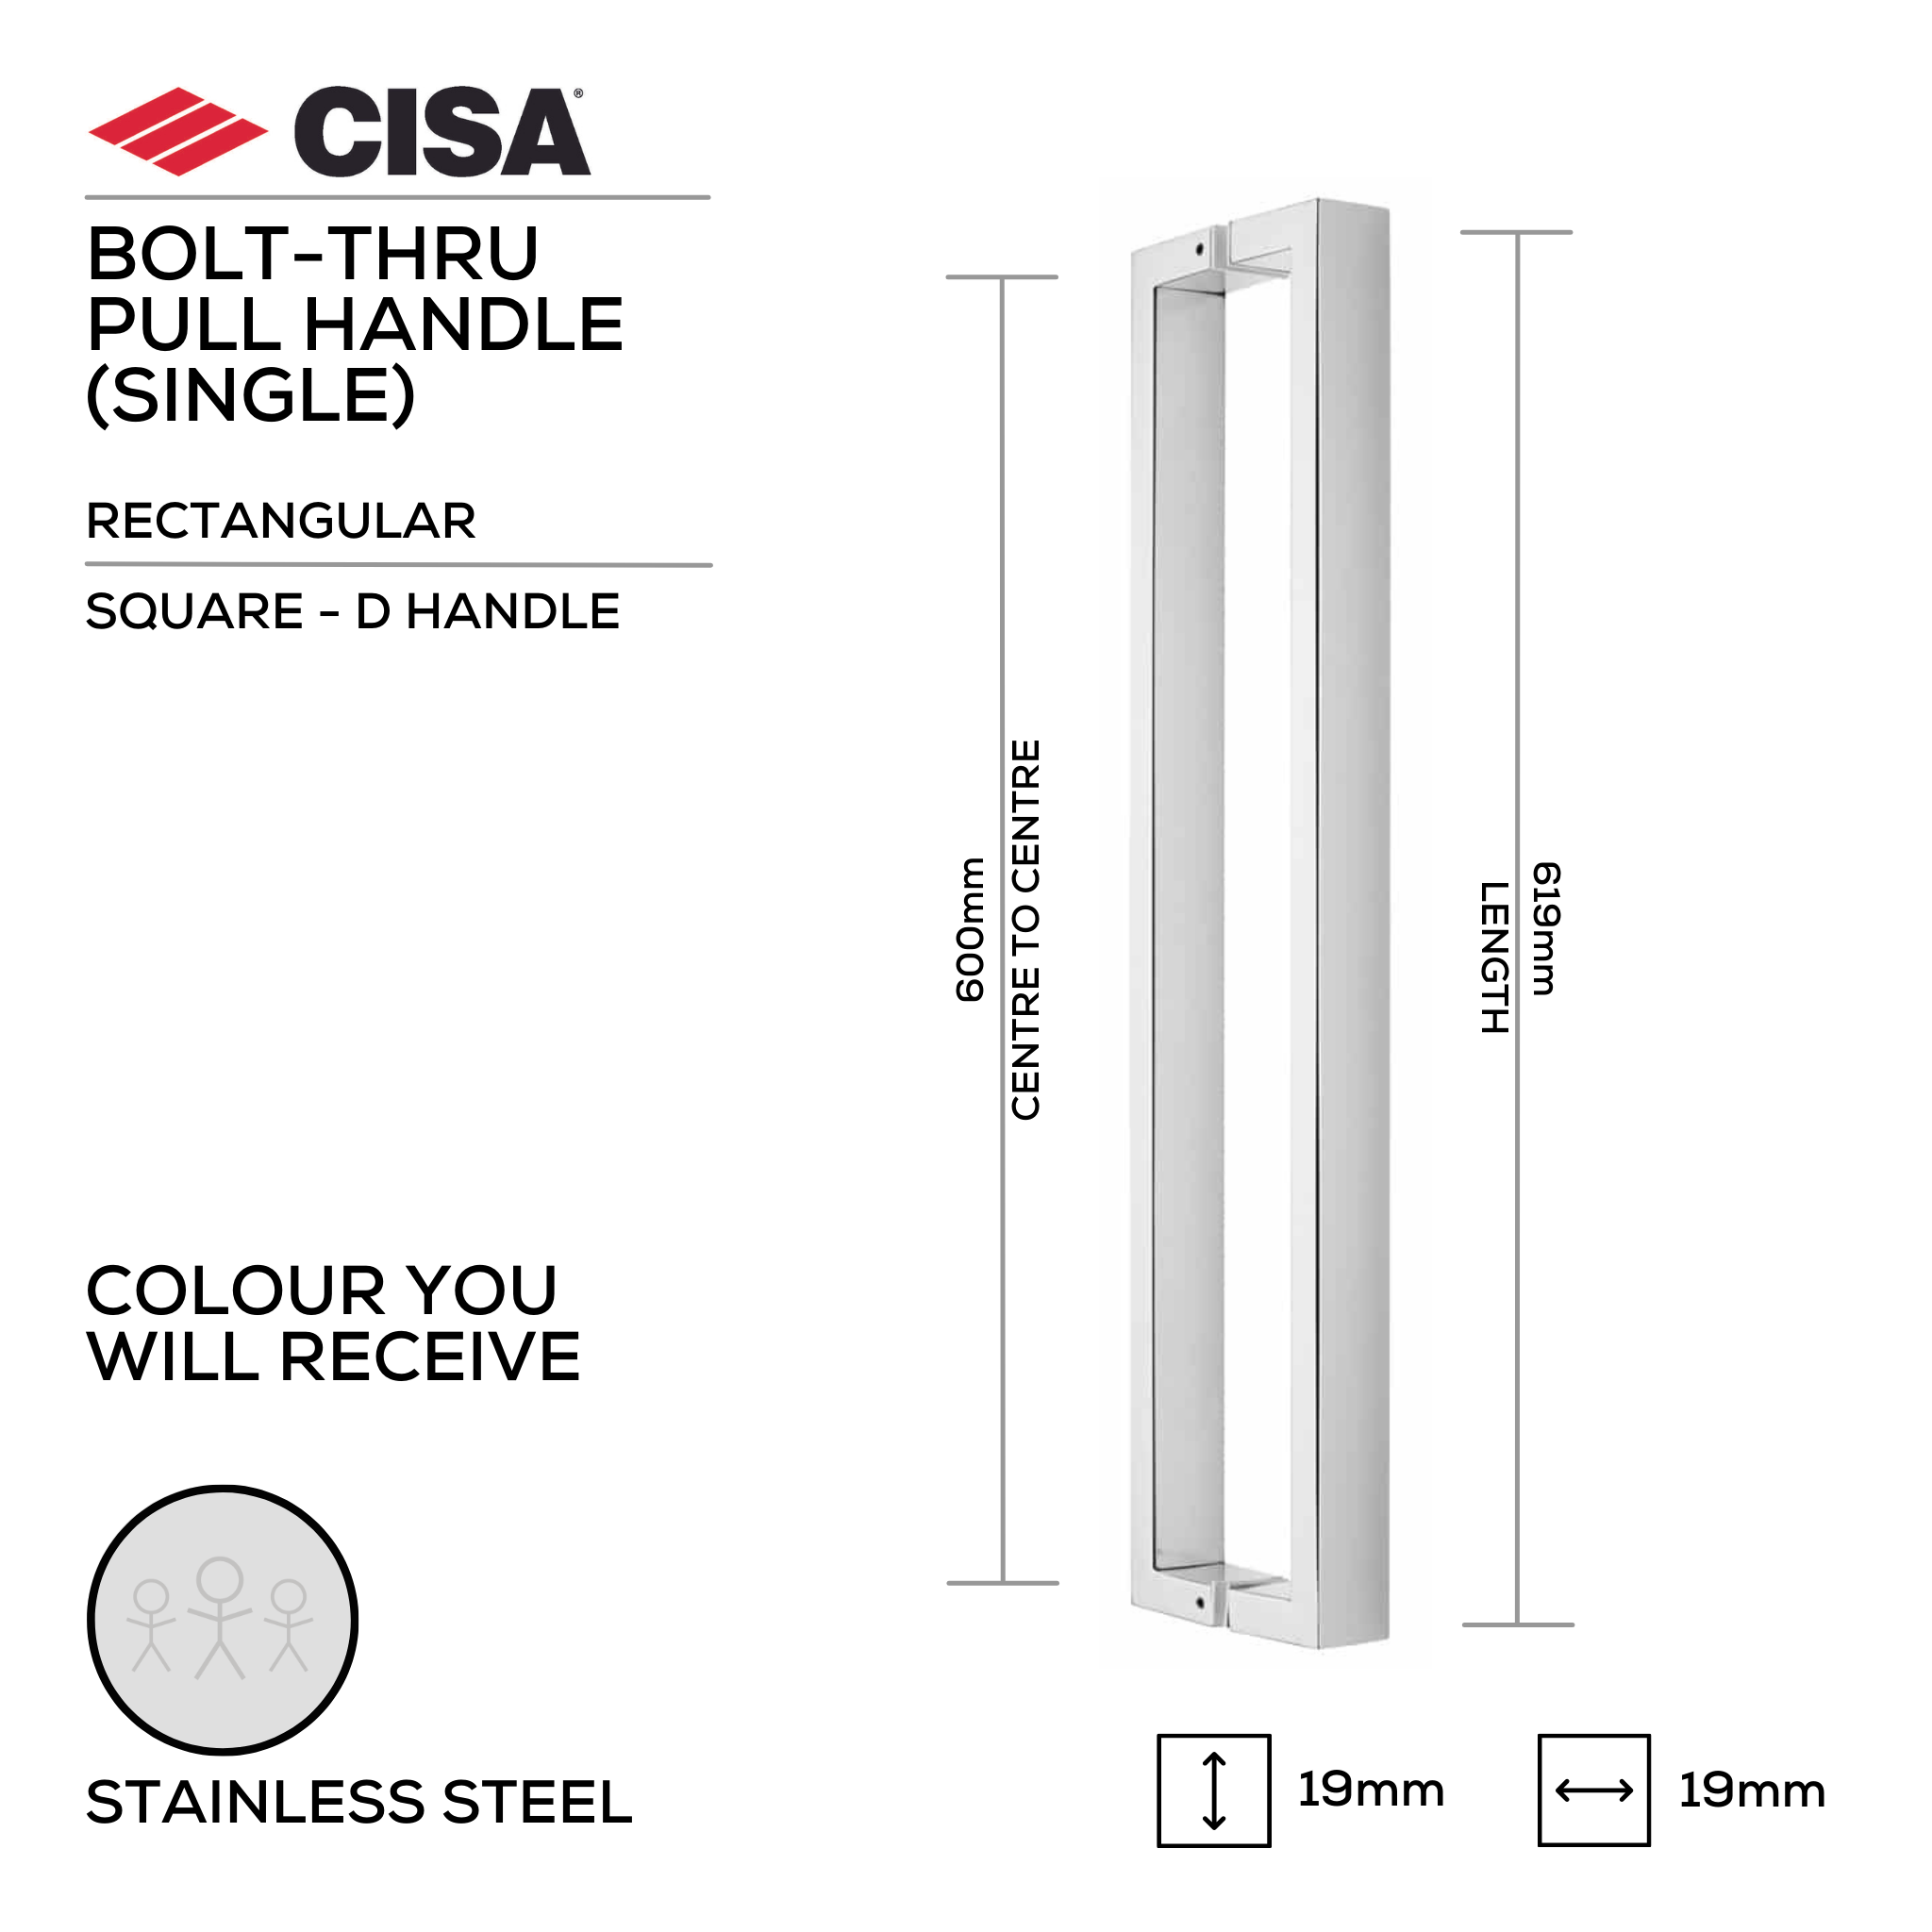 FP.SD04.BTF.SS, Pull Handle, Square, D Handle, BoltThru, 19mm (d) x 619mm (l) x 600mm (ctc), Stainless Steel, CISA